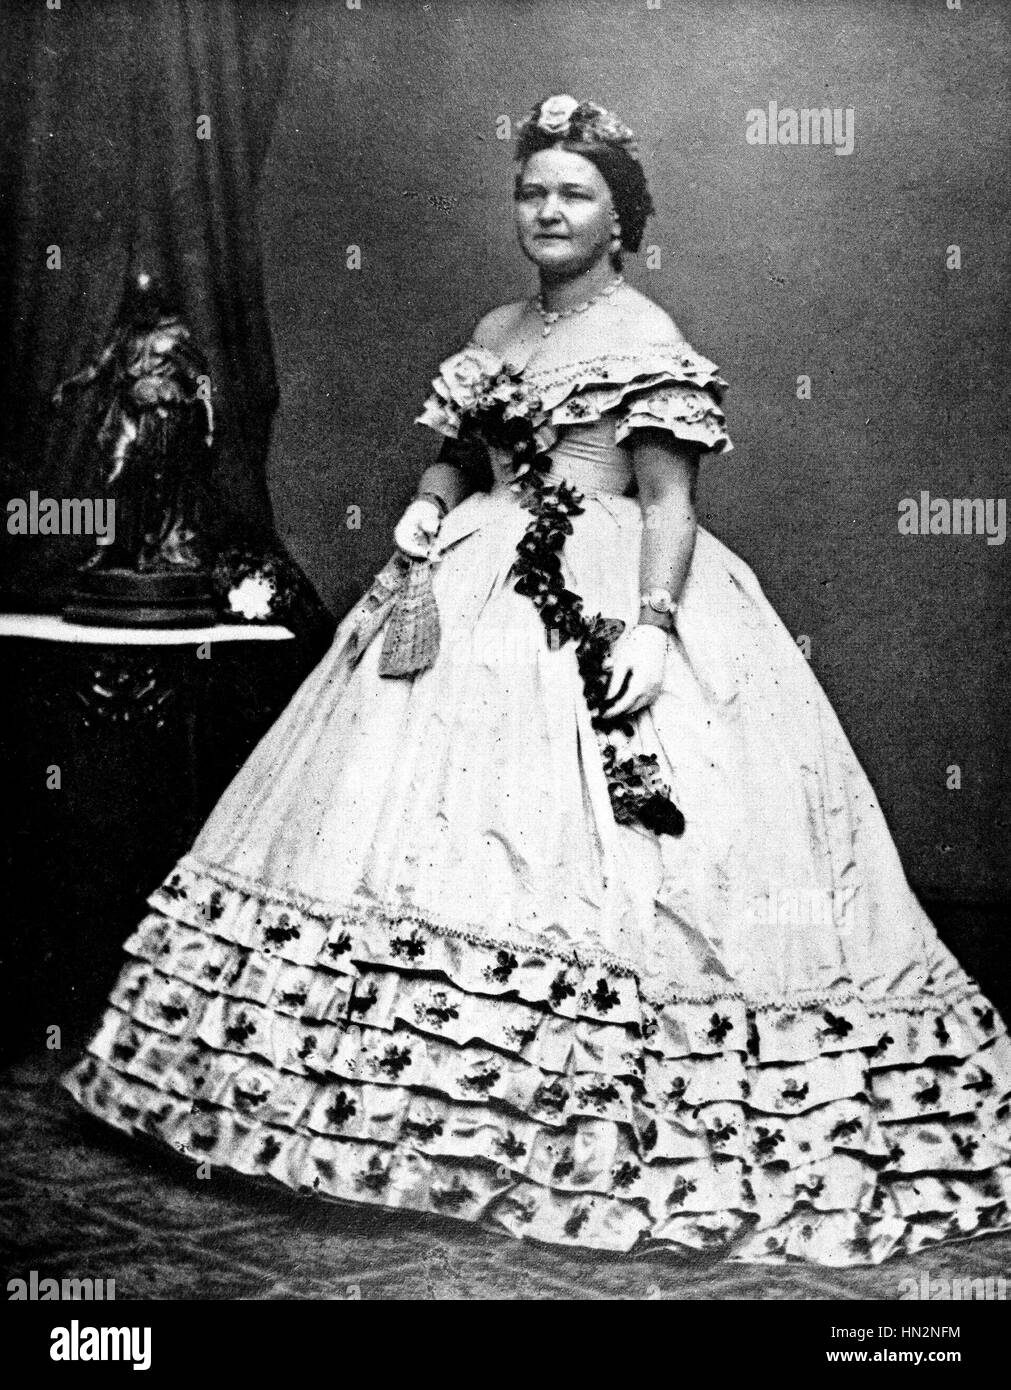 Mary Todd Lincoln, épouse d'Abraham Lincoln 19e siècle United States Banque D'Images